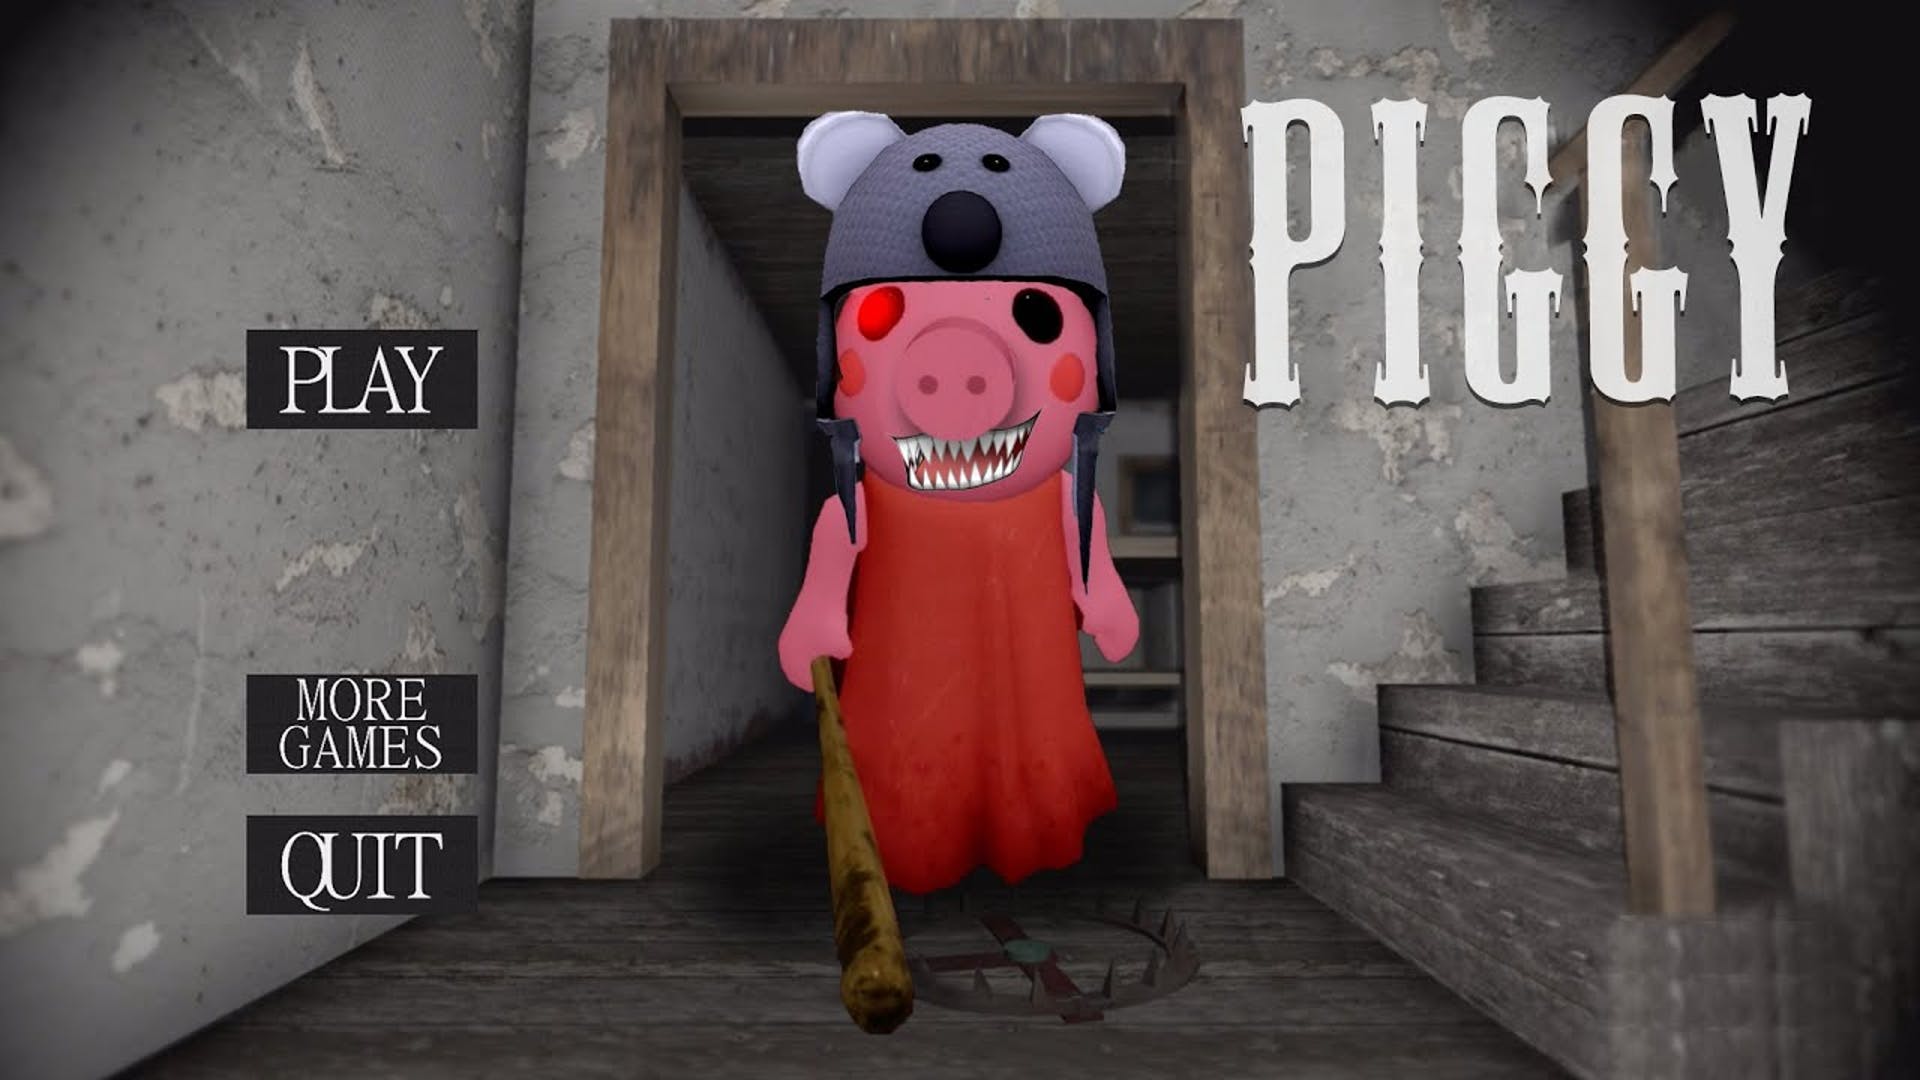 Featured image of post Robby Roblox Piggy Wallpaper